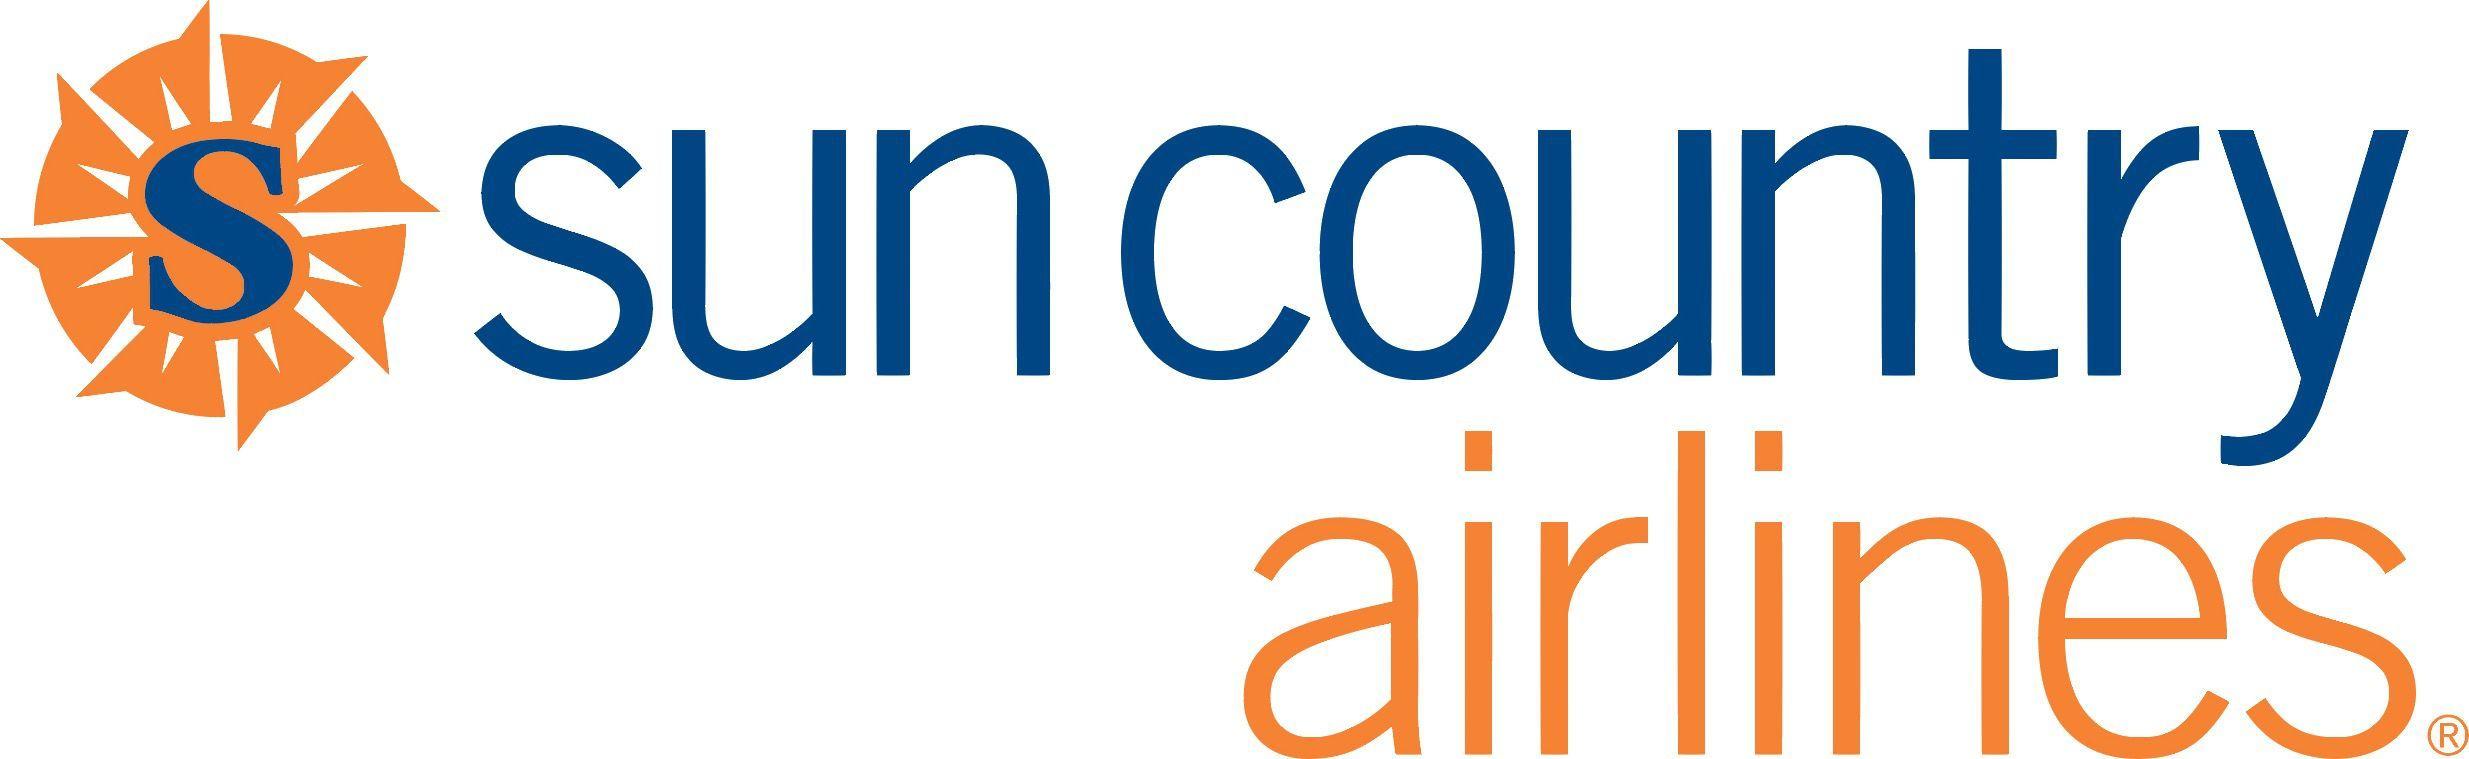 Country Airline Logo - Sun Country Logo - Airline Logo Finder